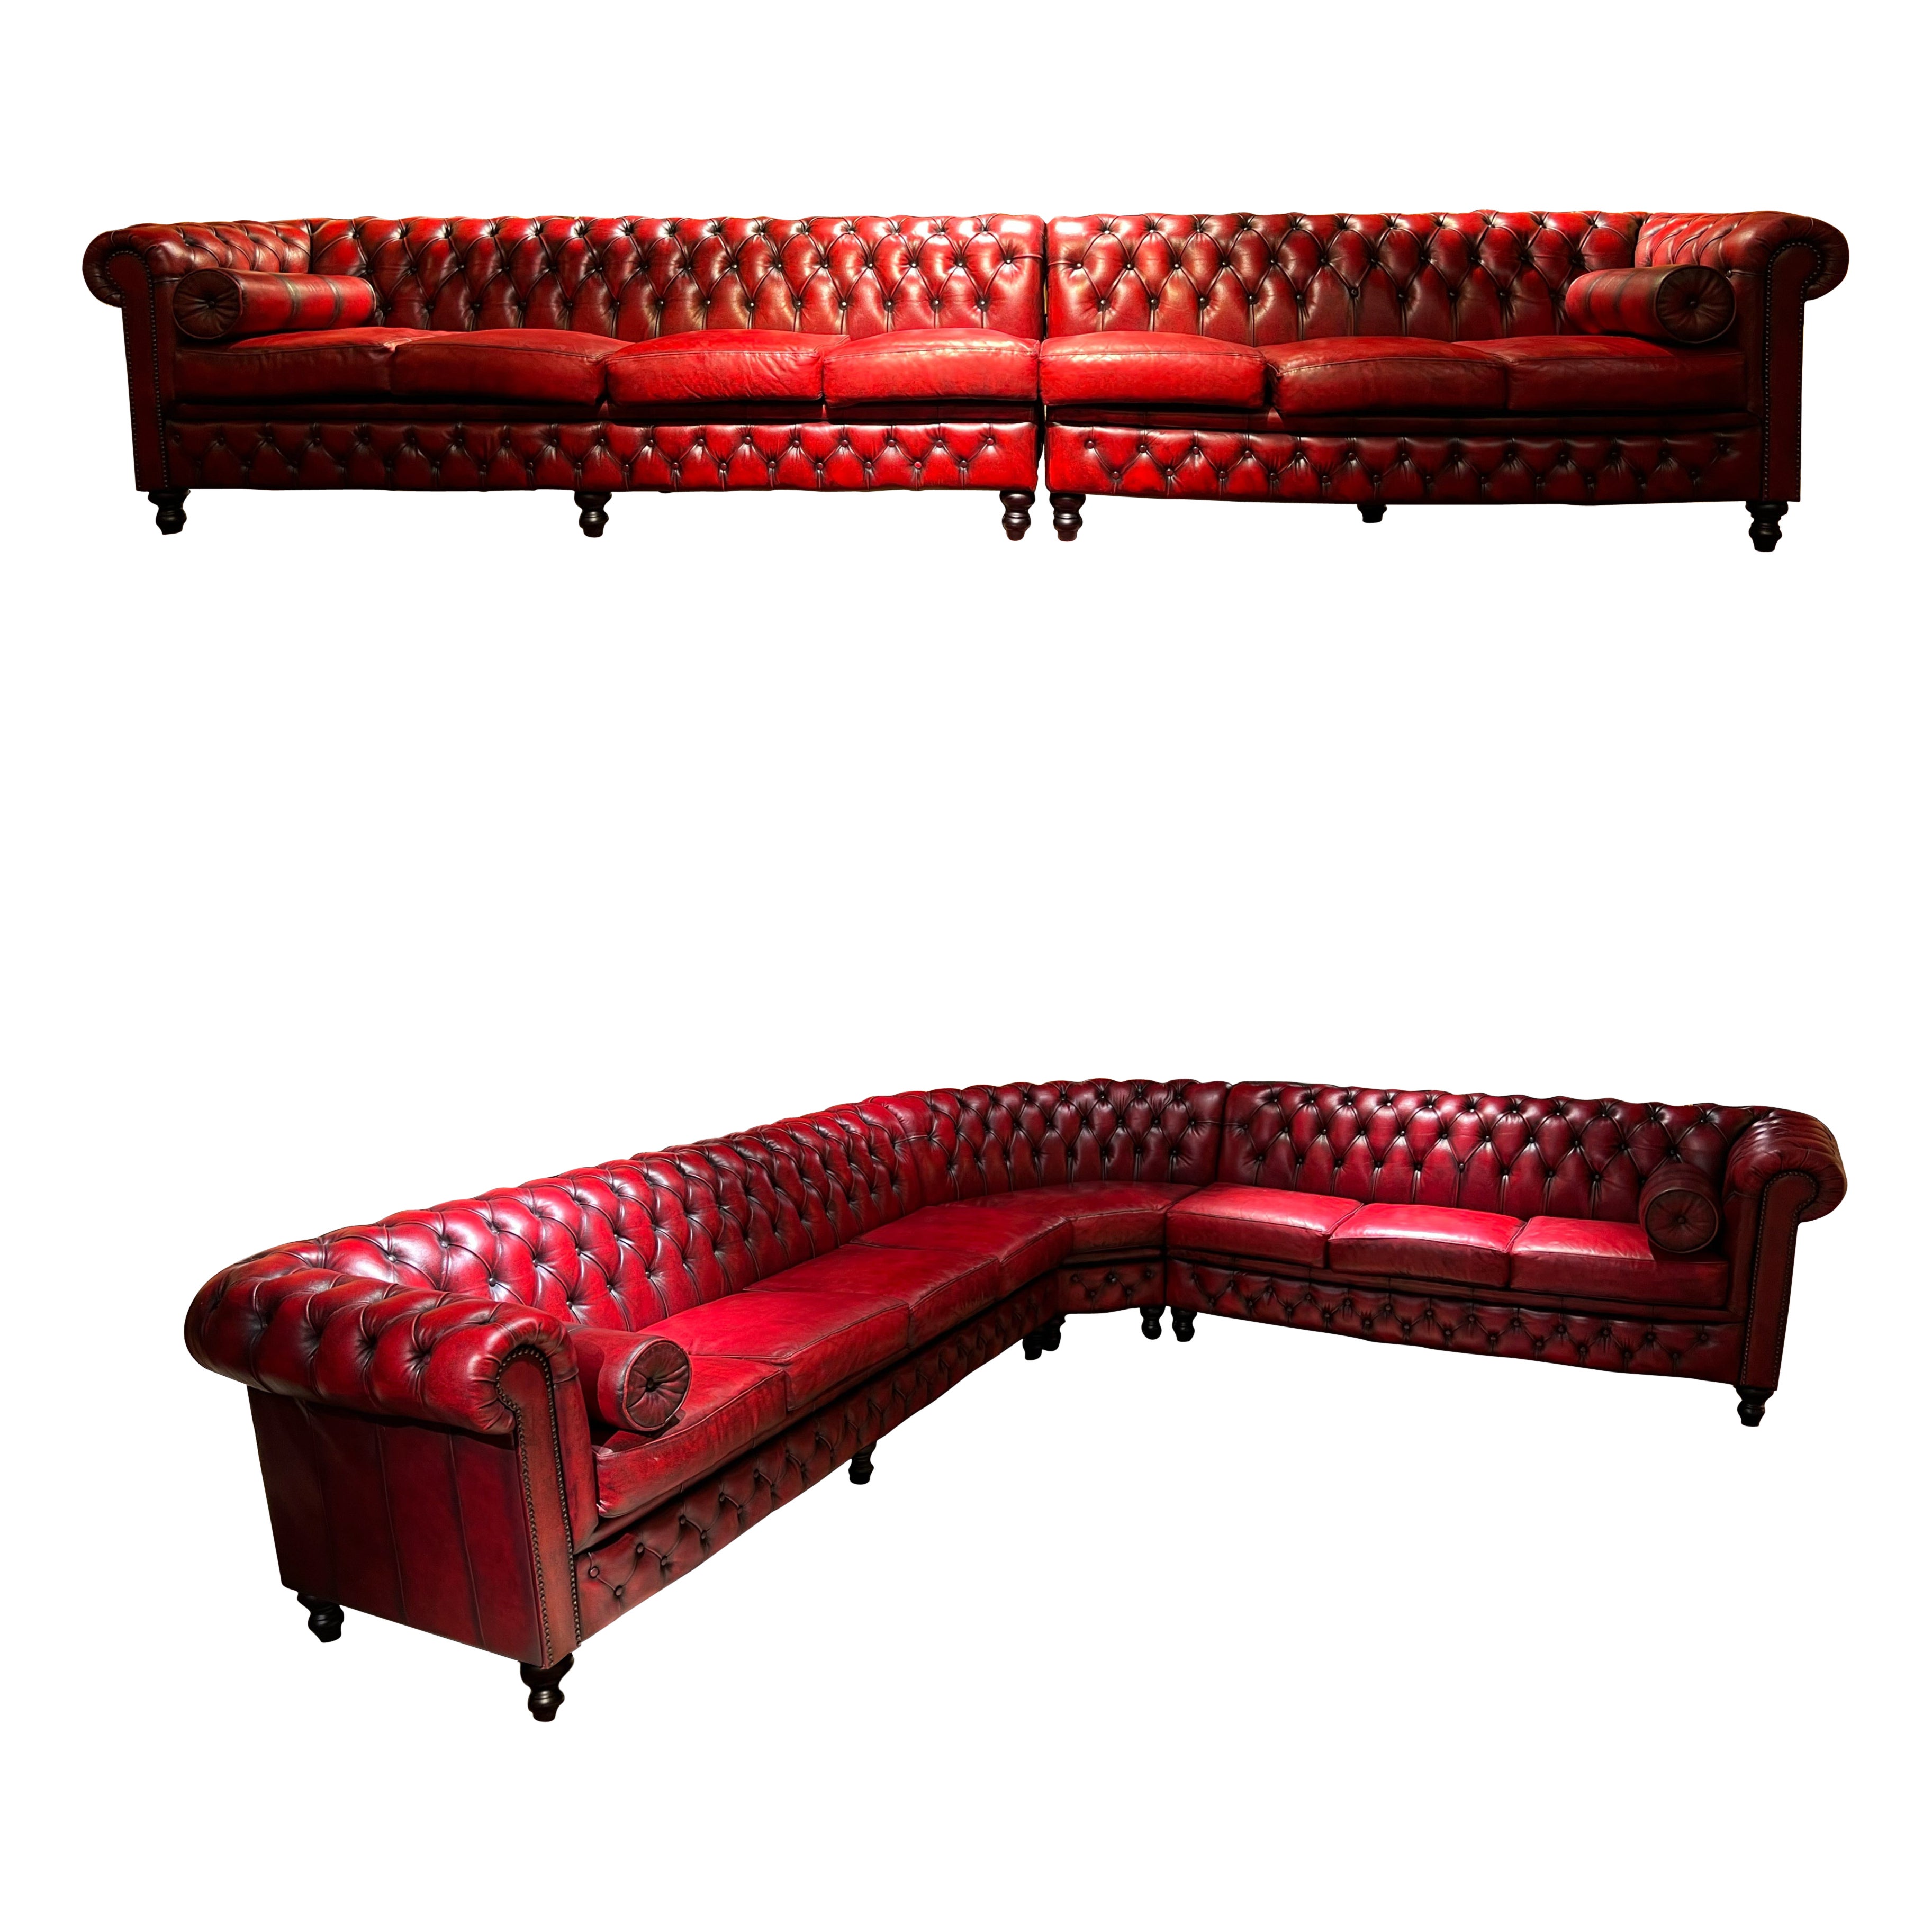 Vintage oxblood Red Chesterfield Corner Couch or Seven Seater Sofa / Set